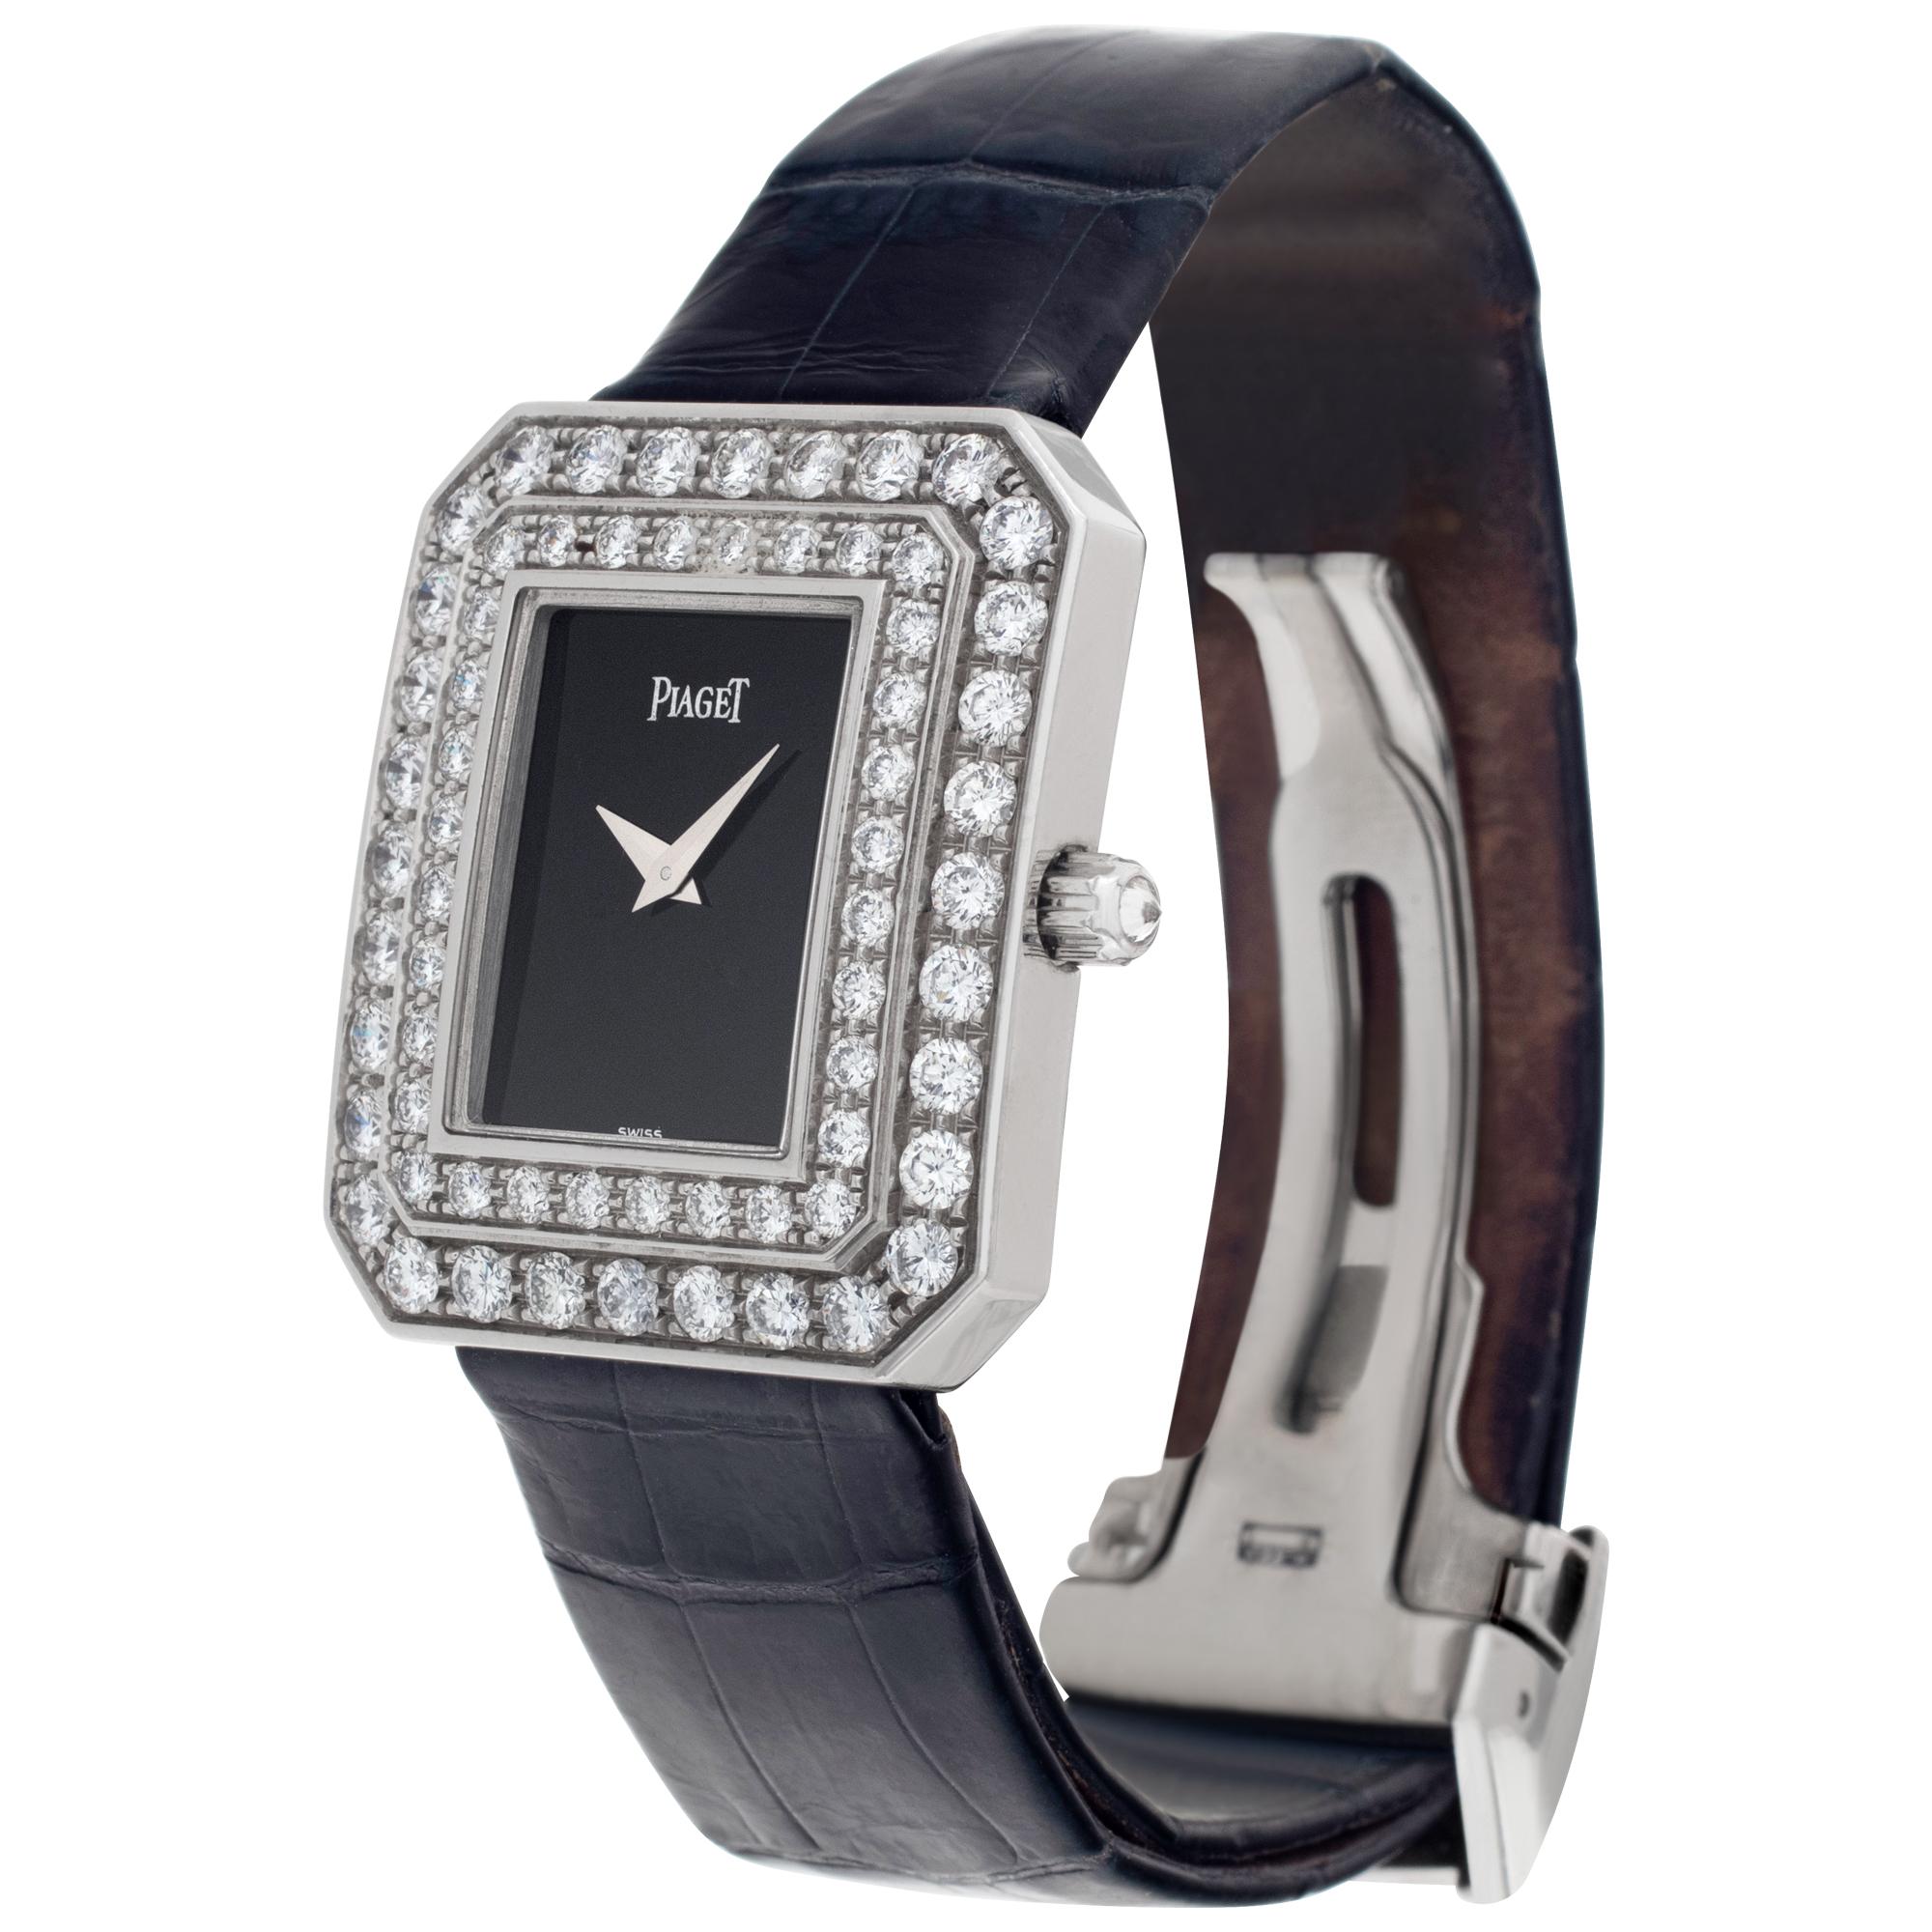 Piaget in 18k white gold with factory original double row of round brilliant cut diamonds. Total approximate diamond weight: 4.80 carats, F-G color, VVS Clarity. Quartz. Case size 27mm x 33mm. Black alligator strap with 18k white gold deployant